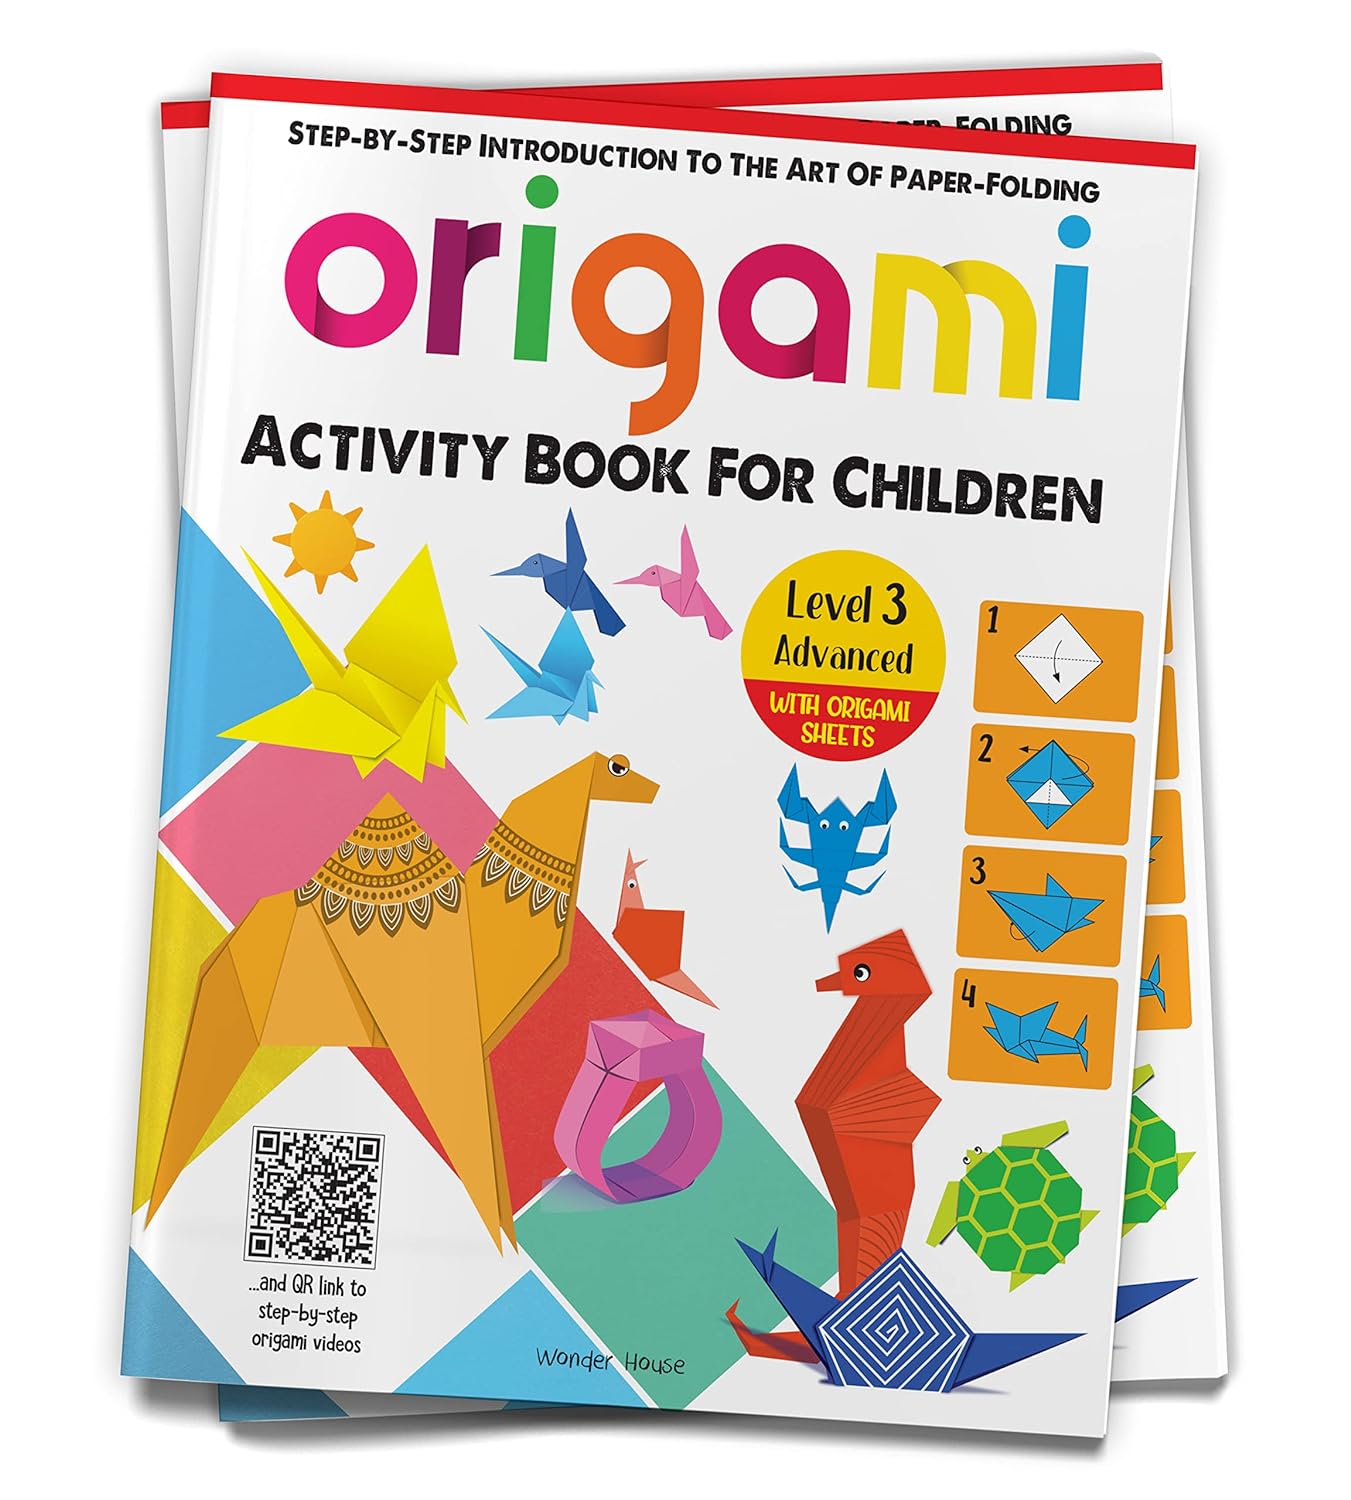 Origami - The Art of Paper-Folding - Activity Book For Children Level - 3